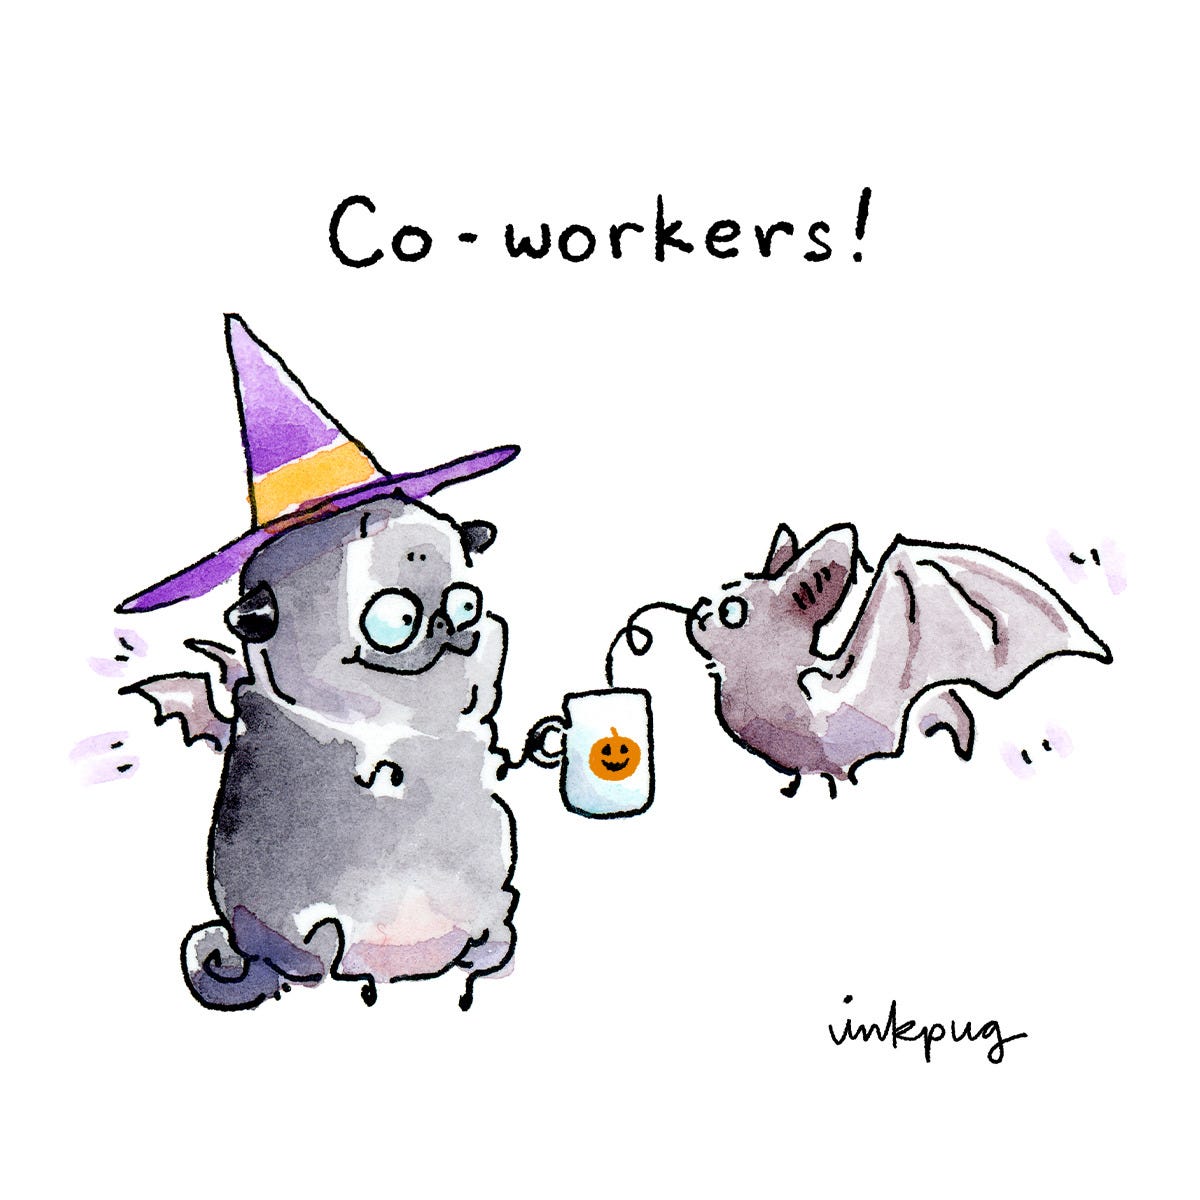 A comic sketch of a black pug with tiny bat wings, holding out a mug of pumpkin spice something to a little black bat, who sips from the mug using a curly straw. Caption reads, "Co-workers!"